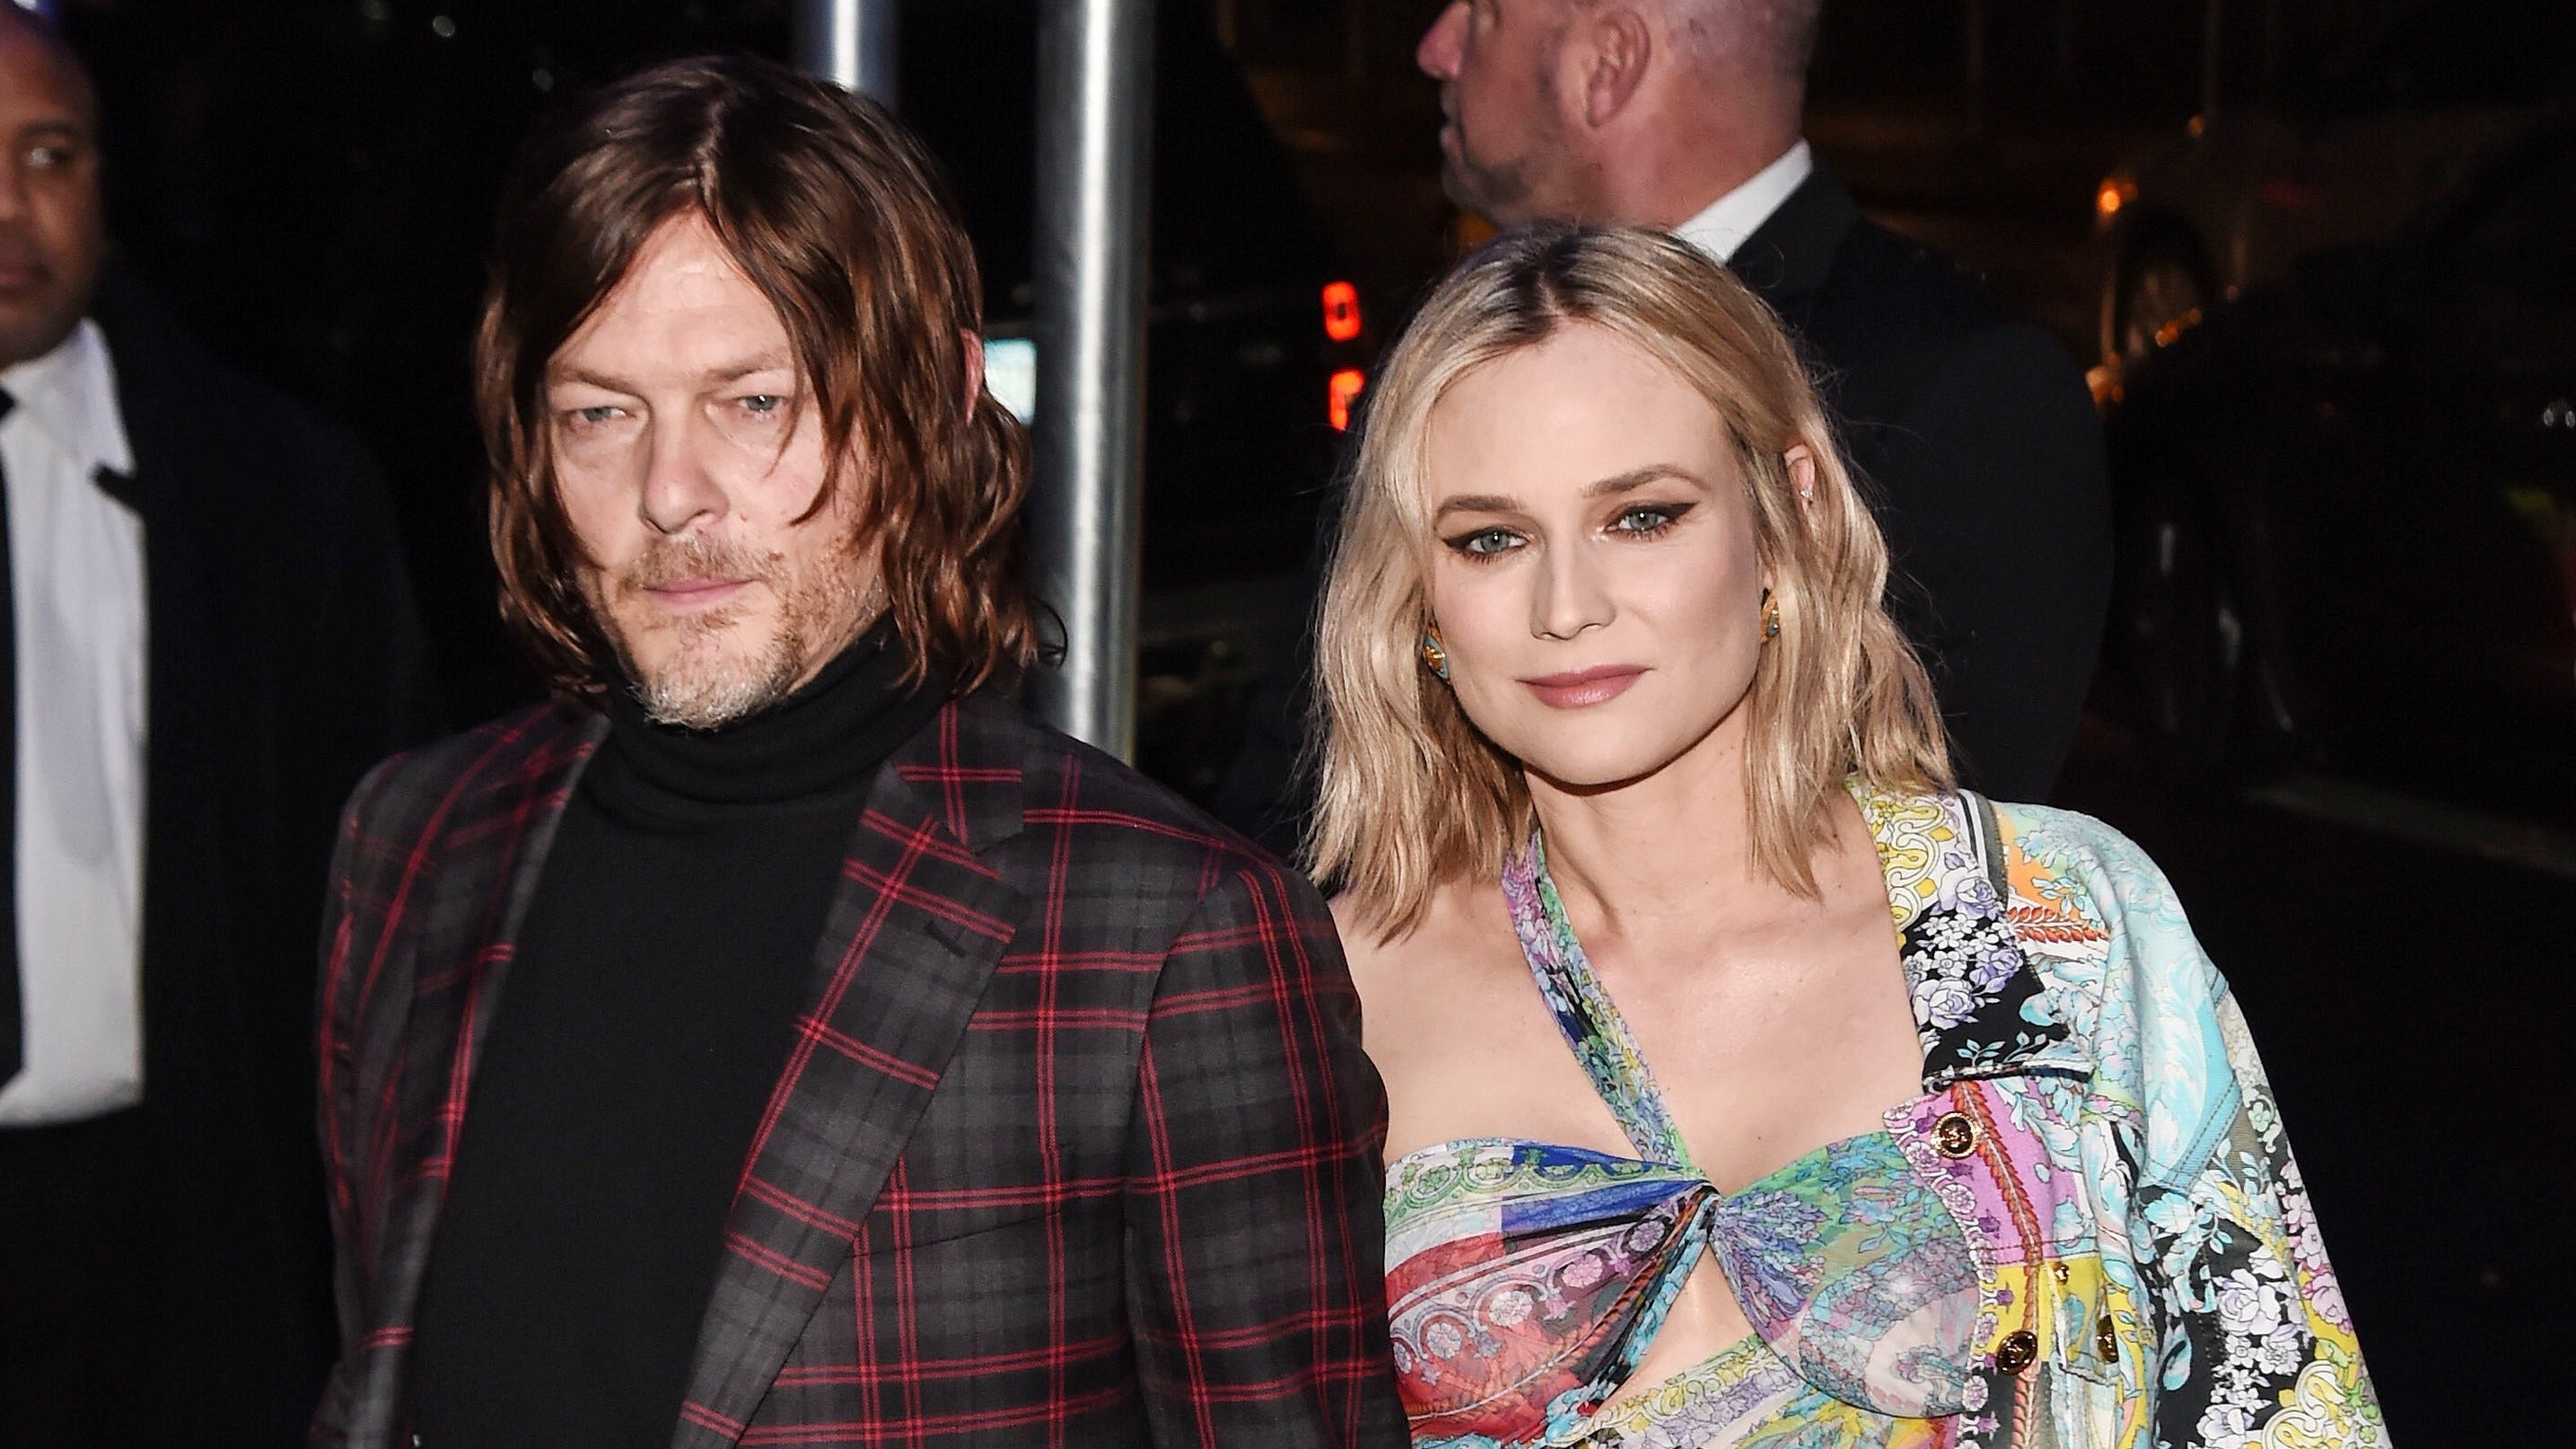 Norman Reedus and Diane Kruger are engaged: reports